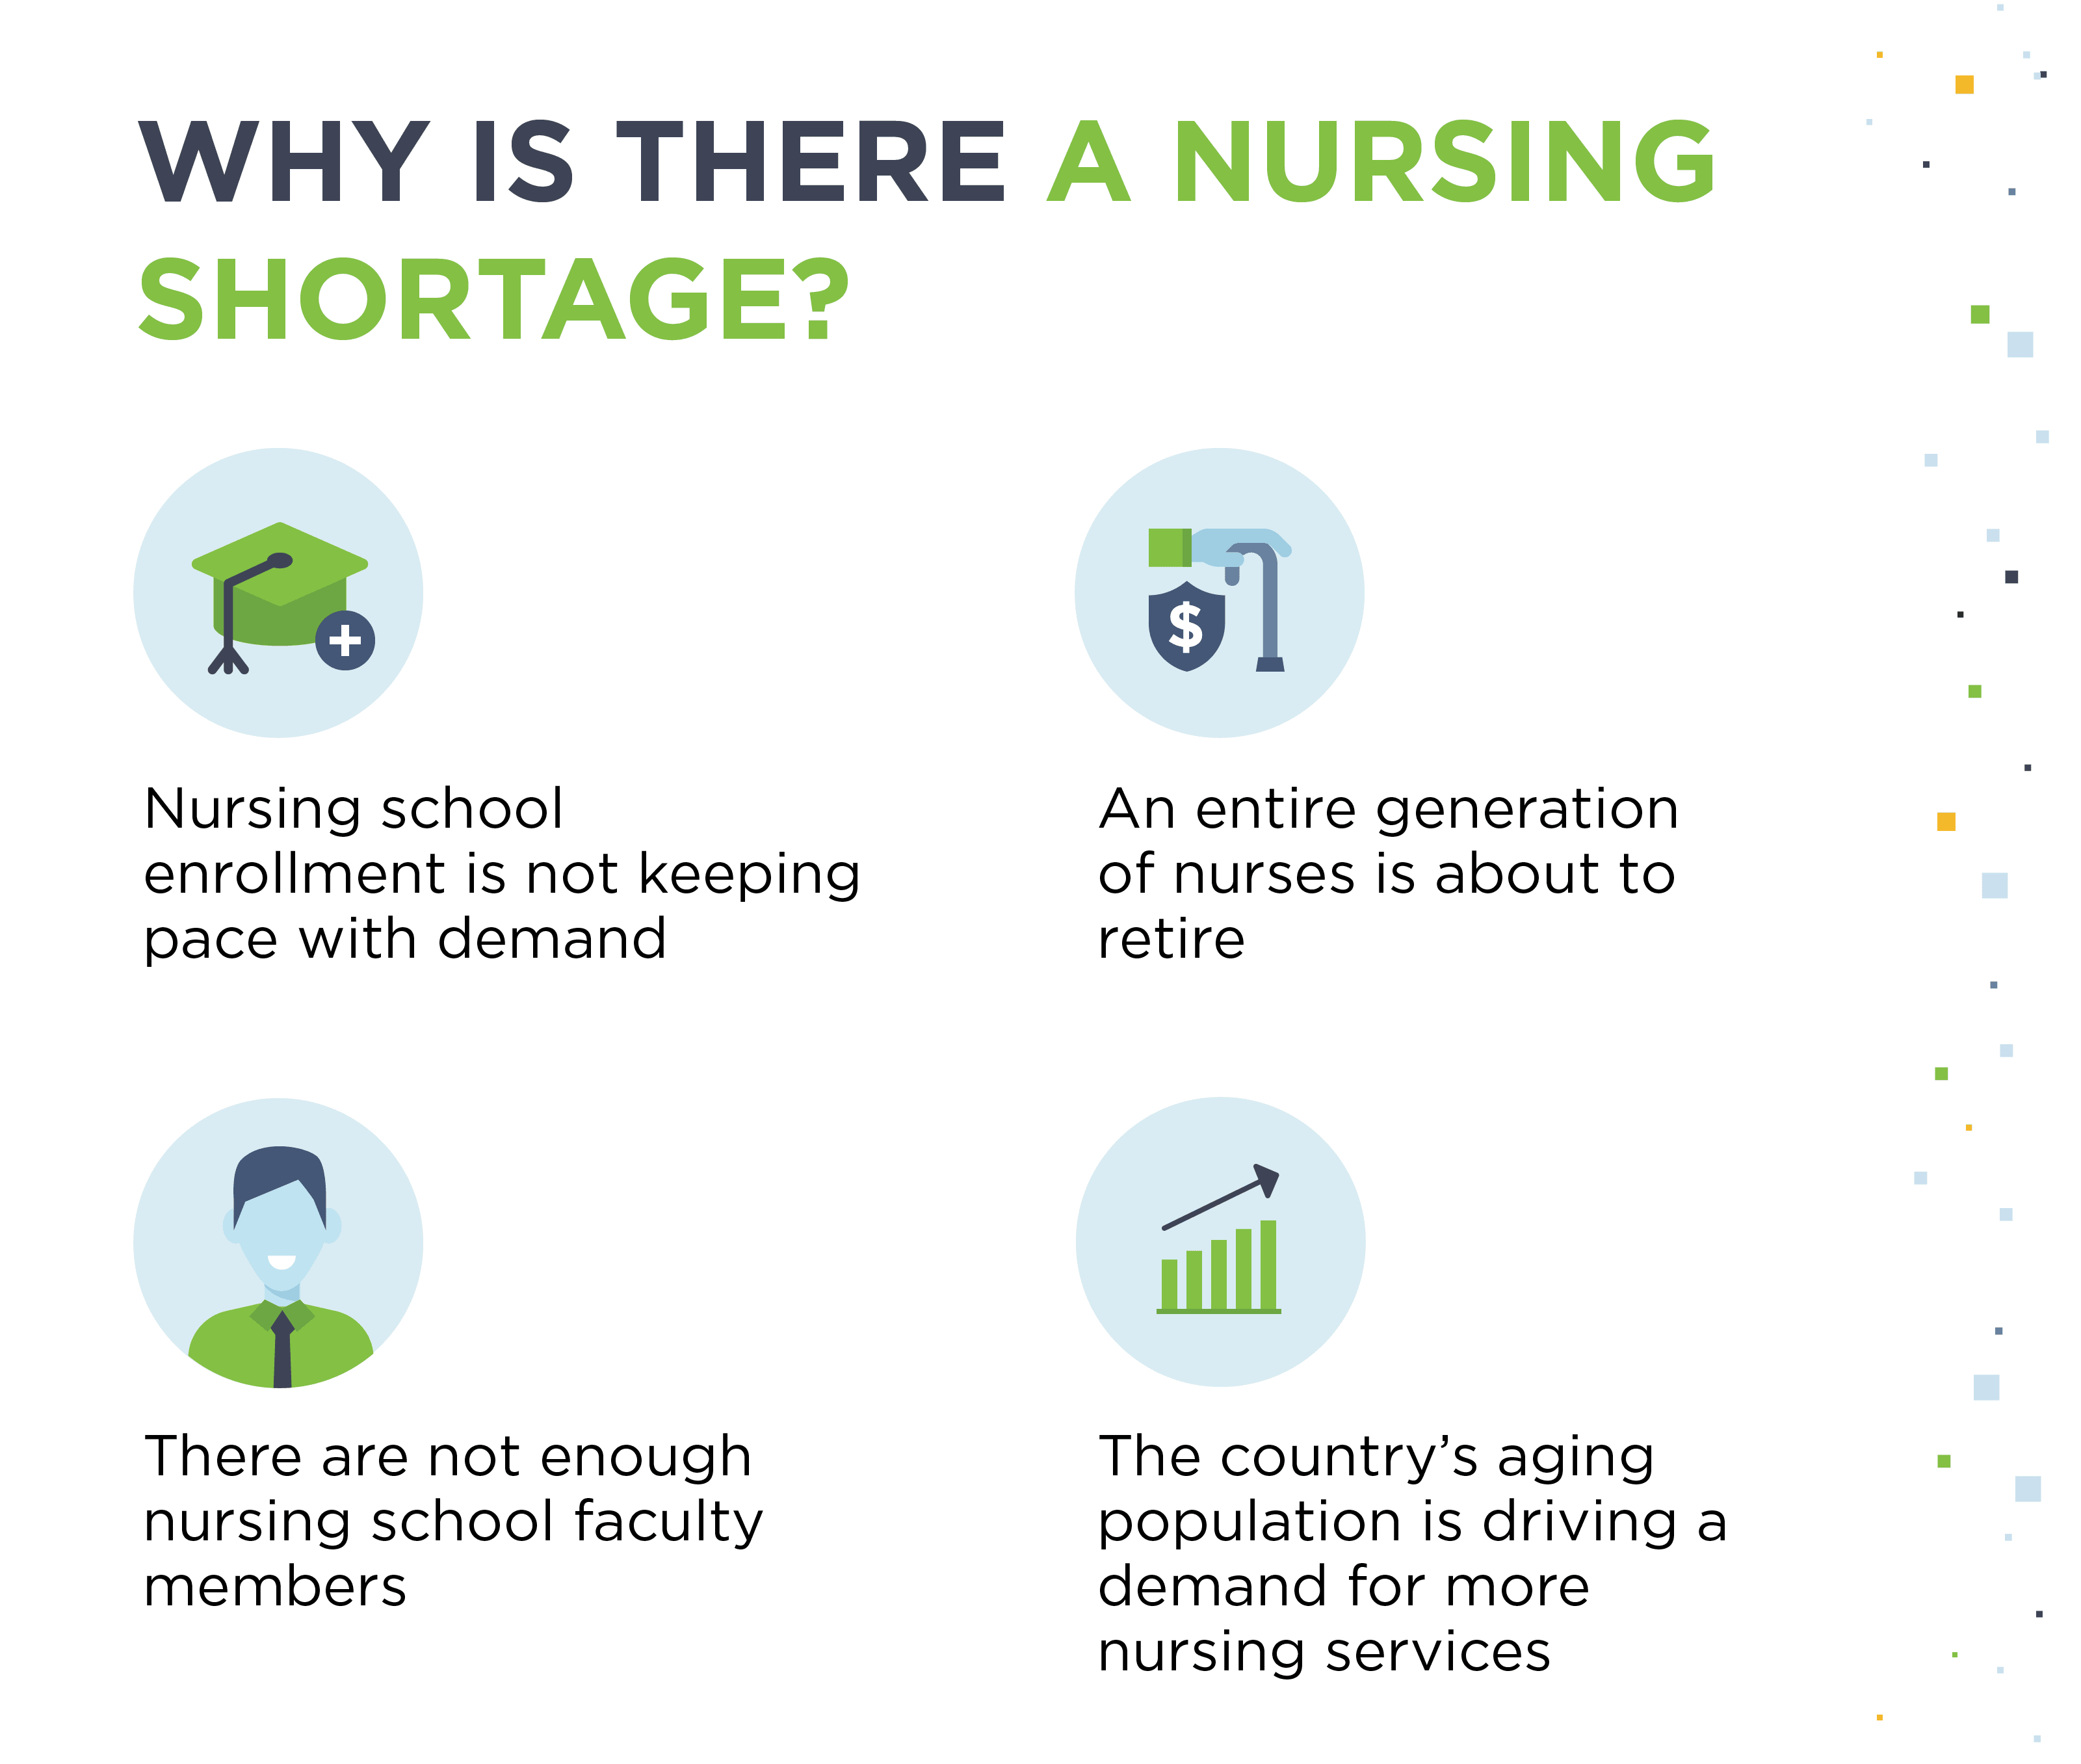 Illustration shows 4 reasons why there is a nursing shortage.